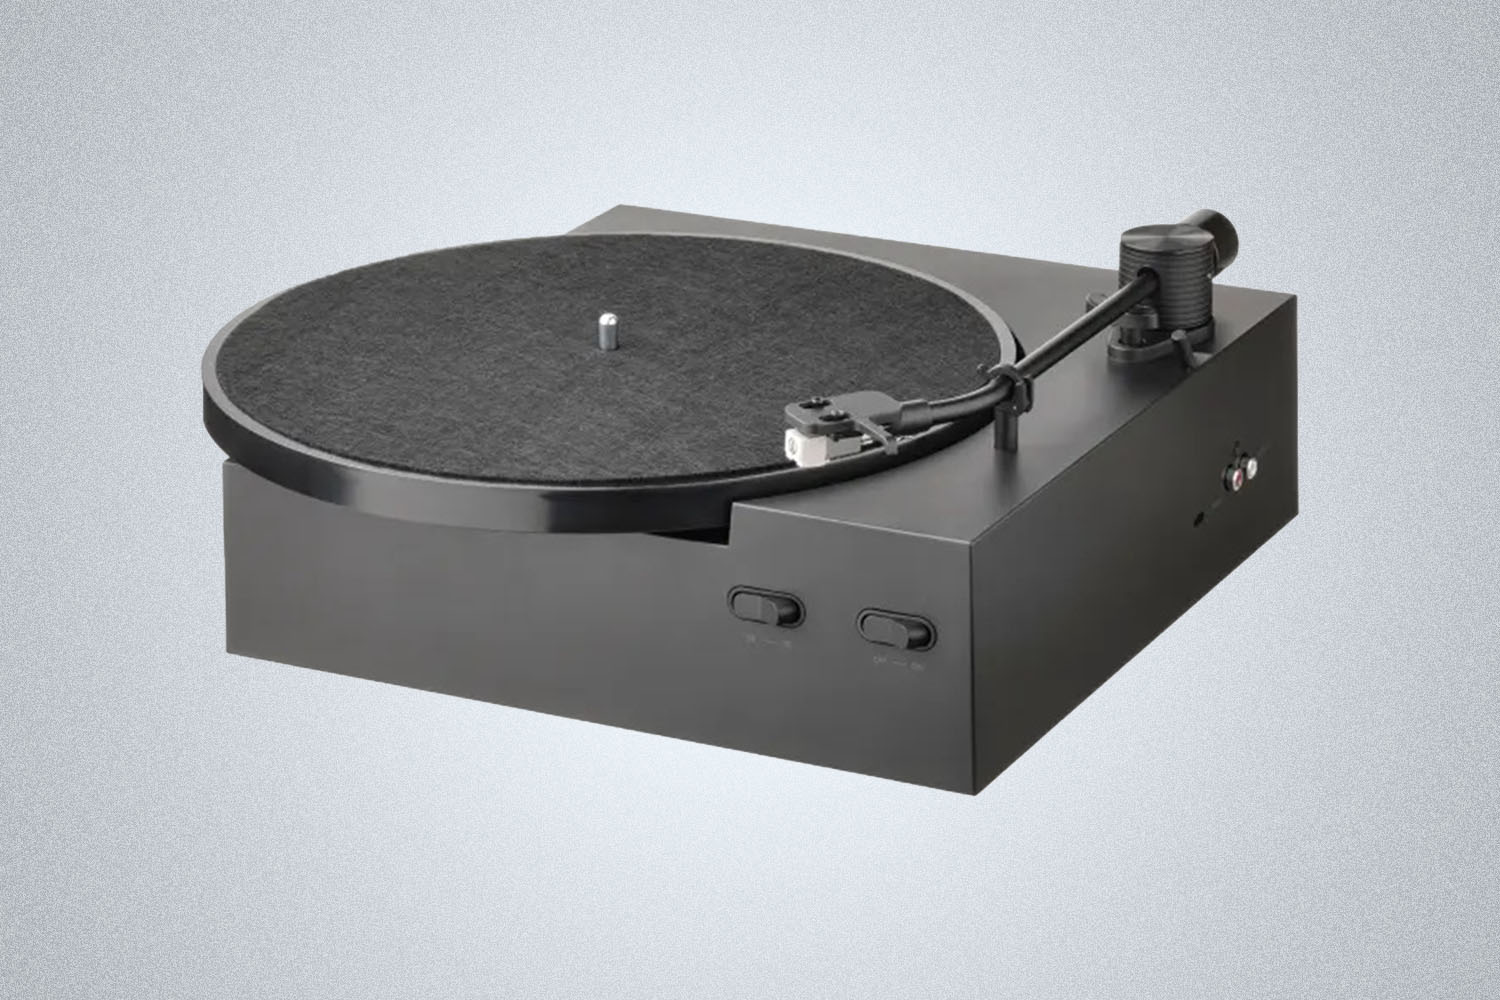 a black Ikea turntable on a gray background